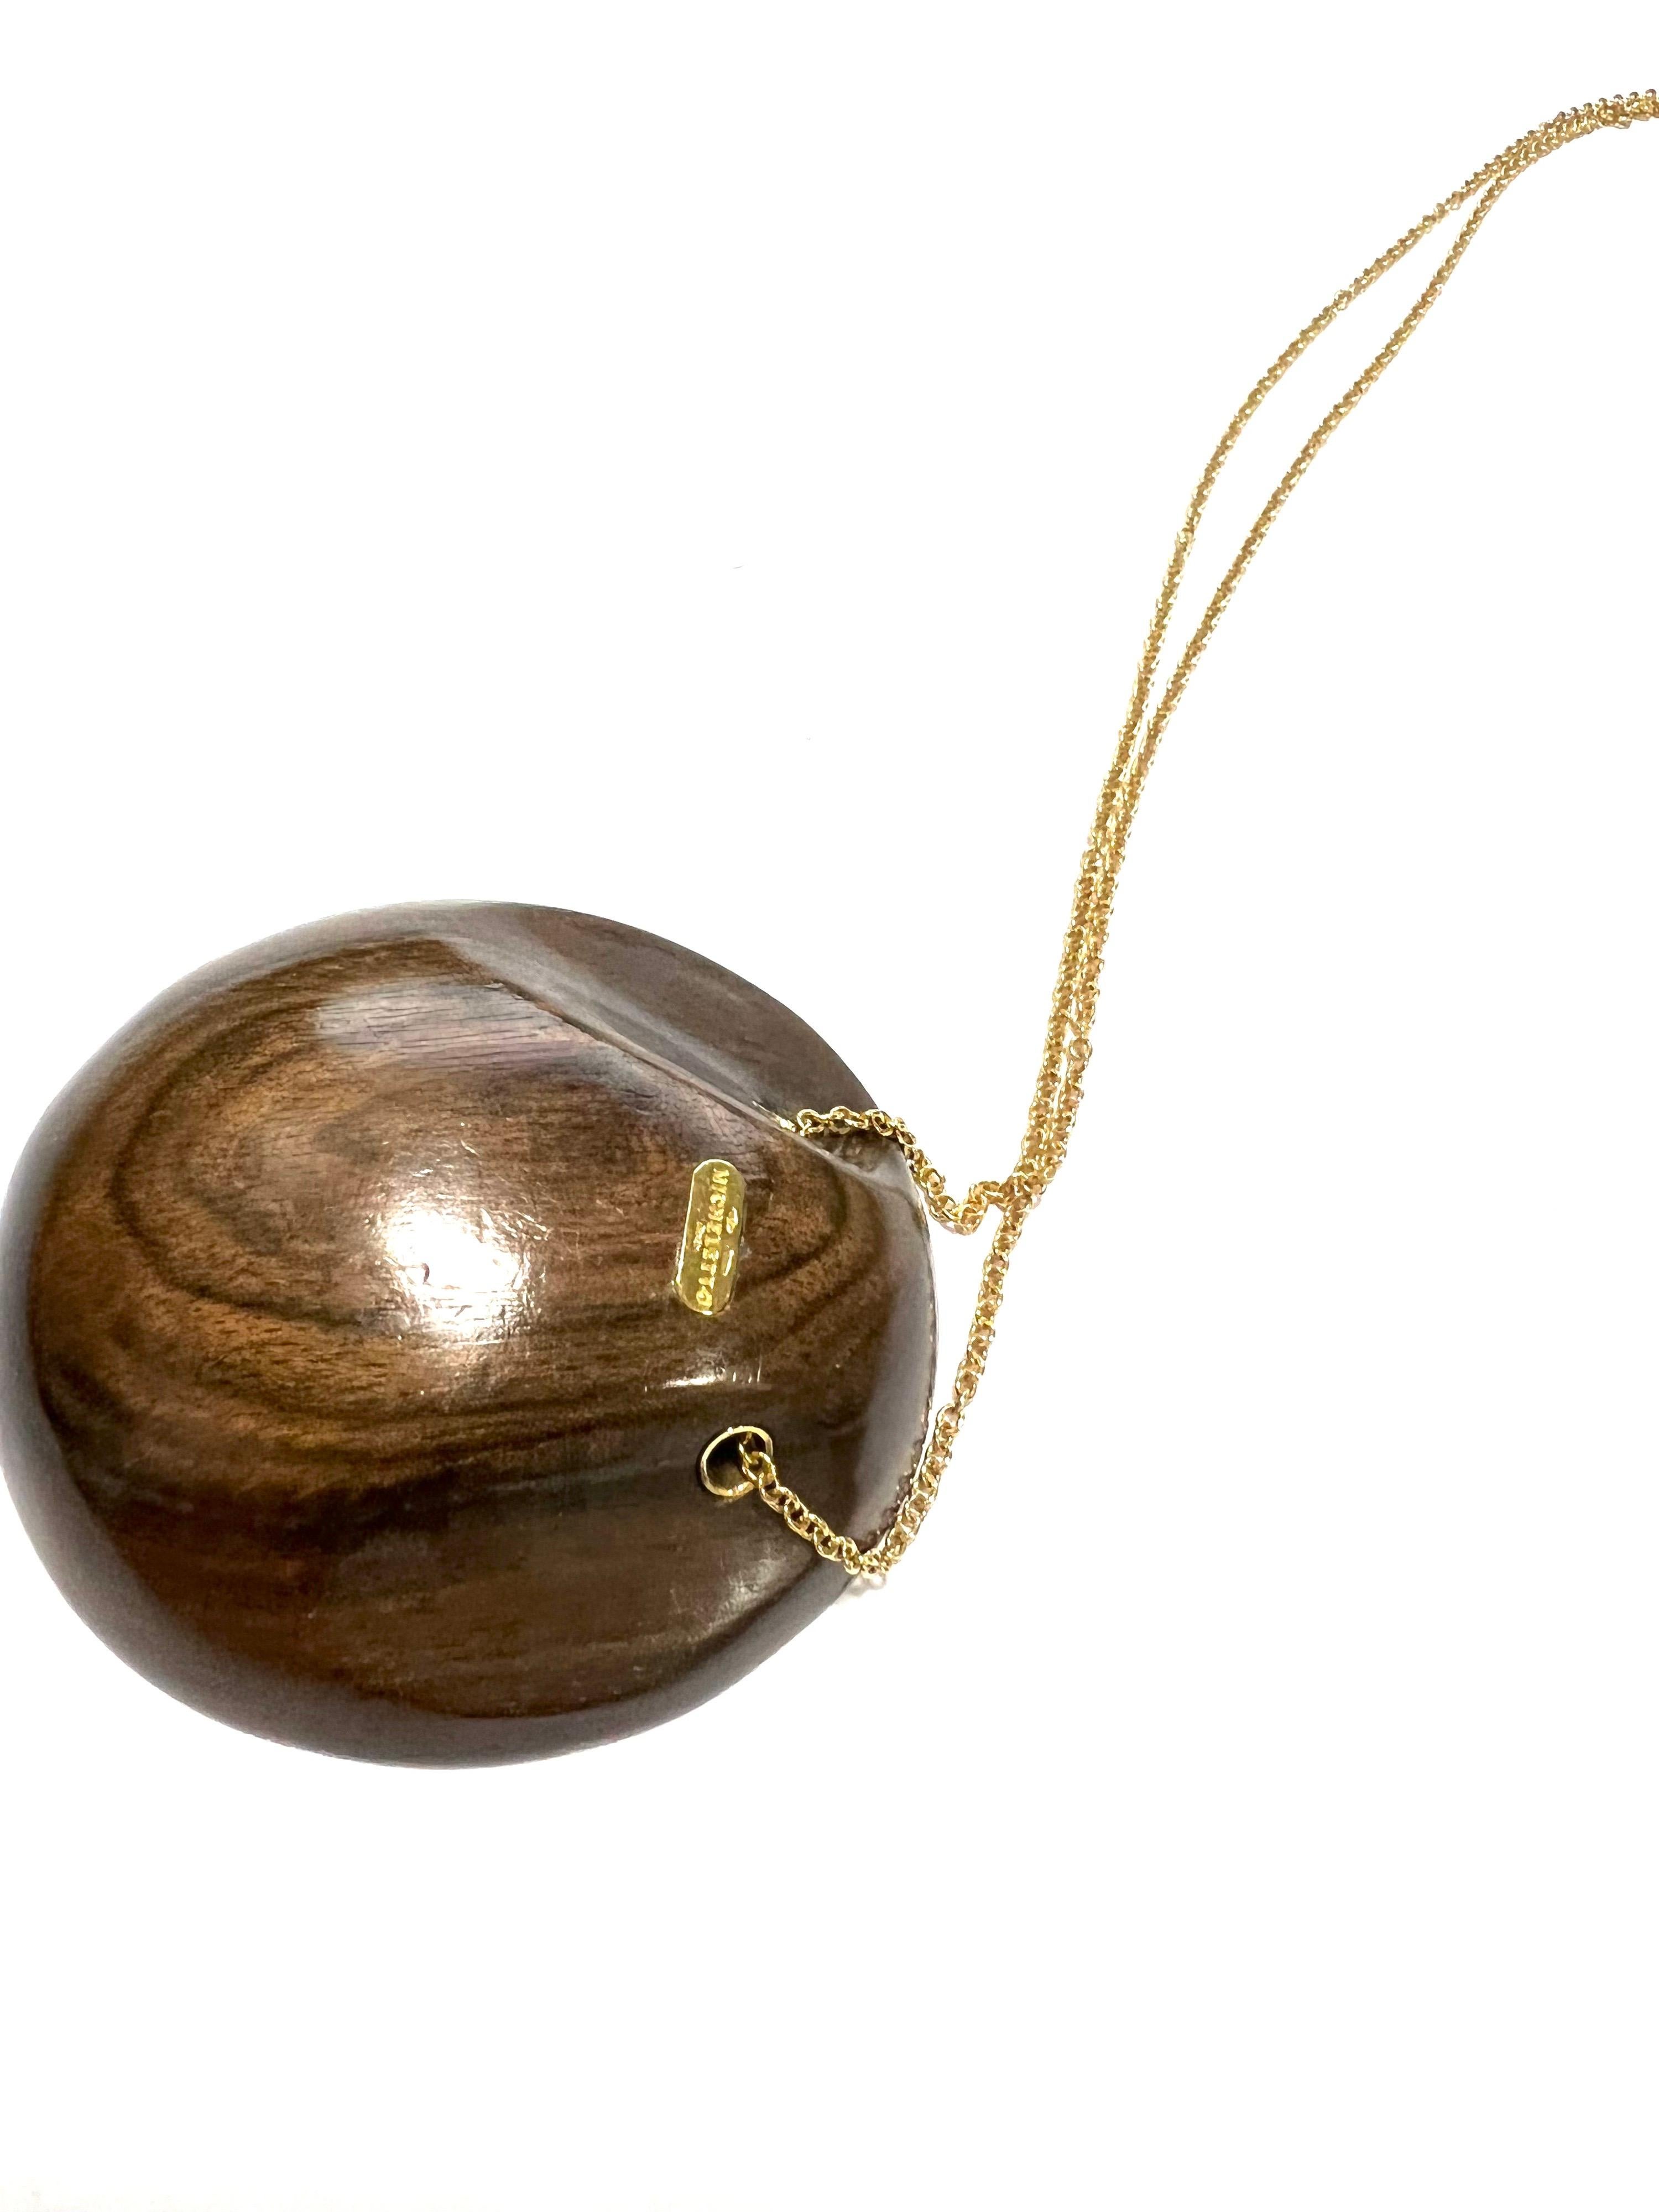 Artist Big Half Sphere Rosewood Pendant on 18K Yellow Gold Necklace For Sale